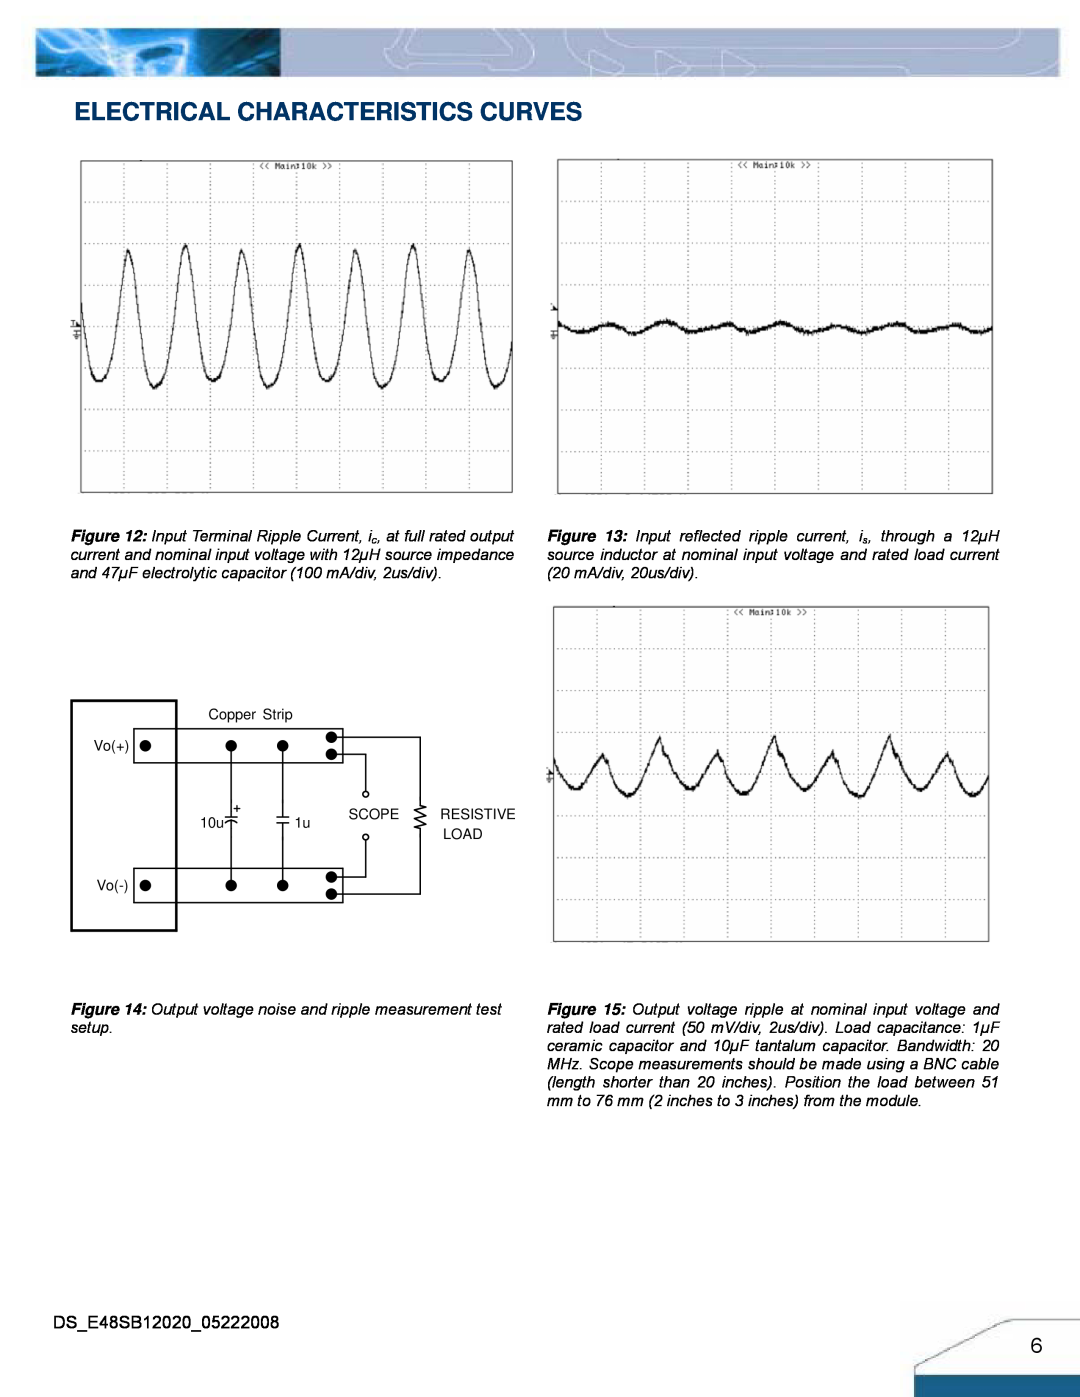 Delta Electronics Series 240W manual Electrical Characteristics Curves, Output voltage noise and ripple measurement test 